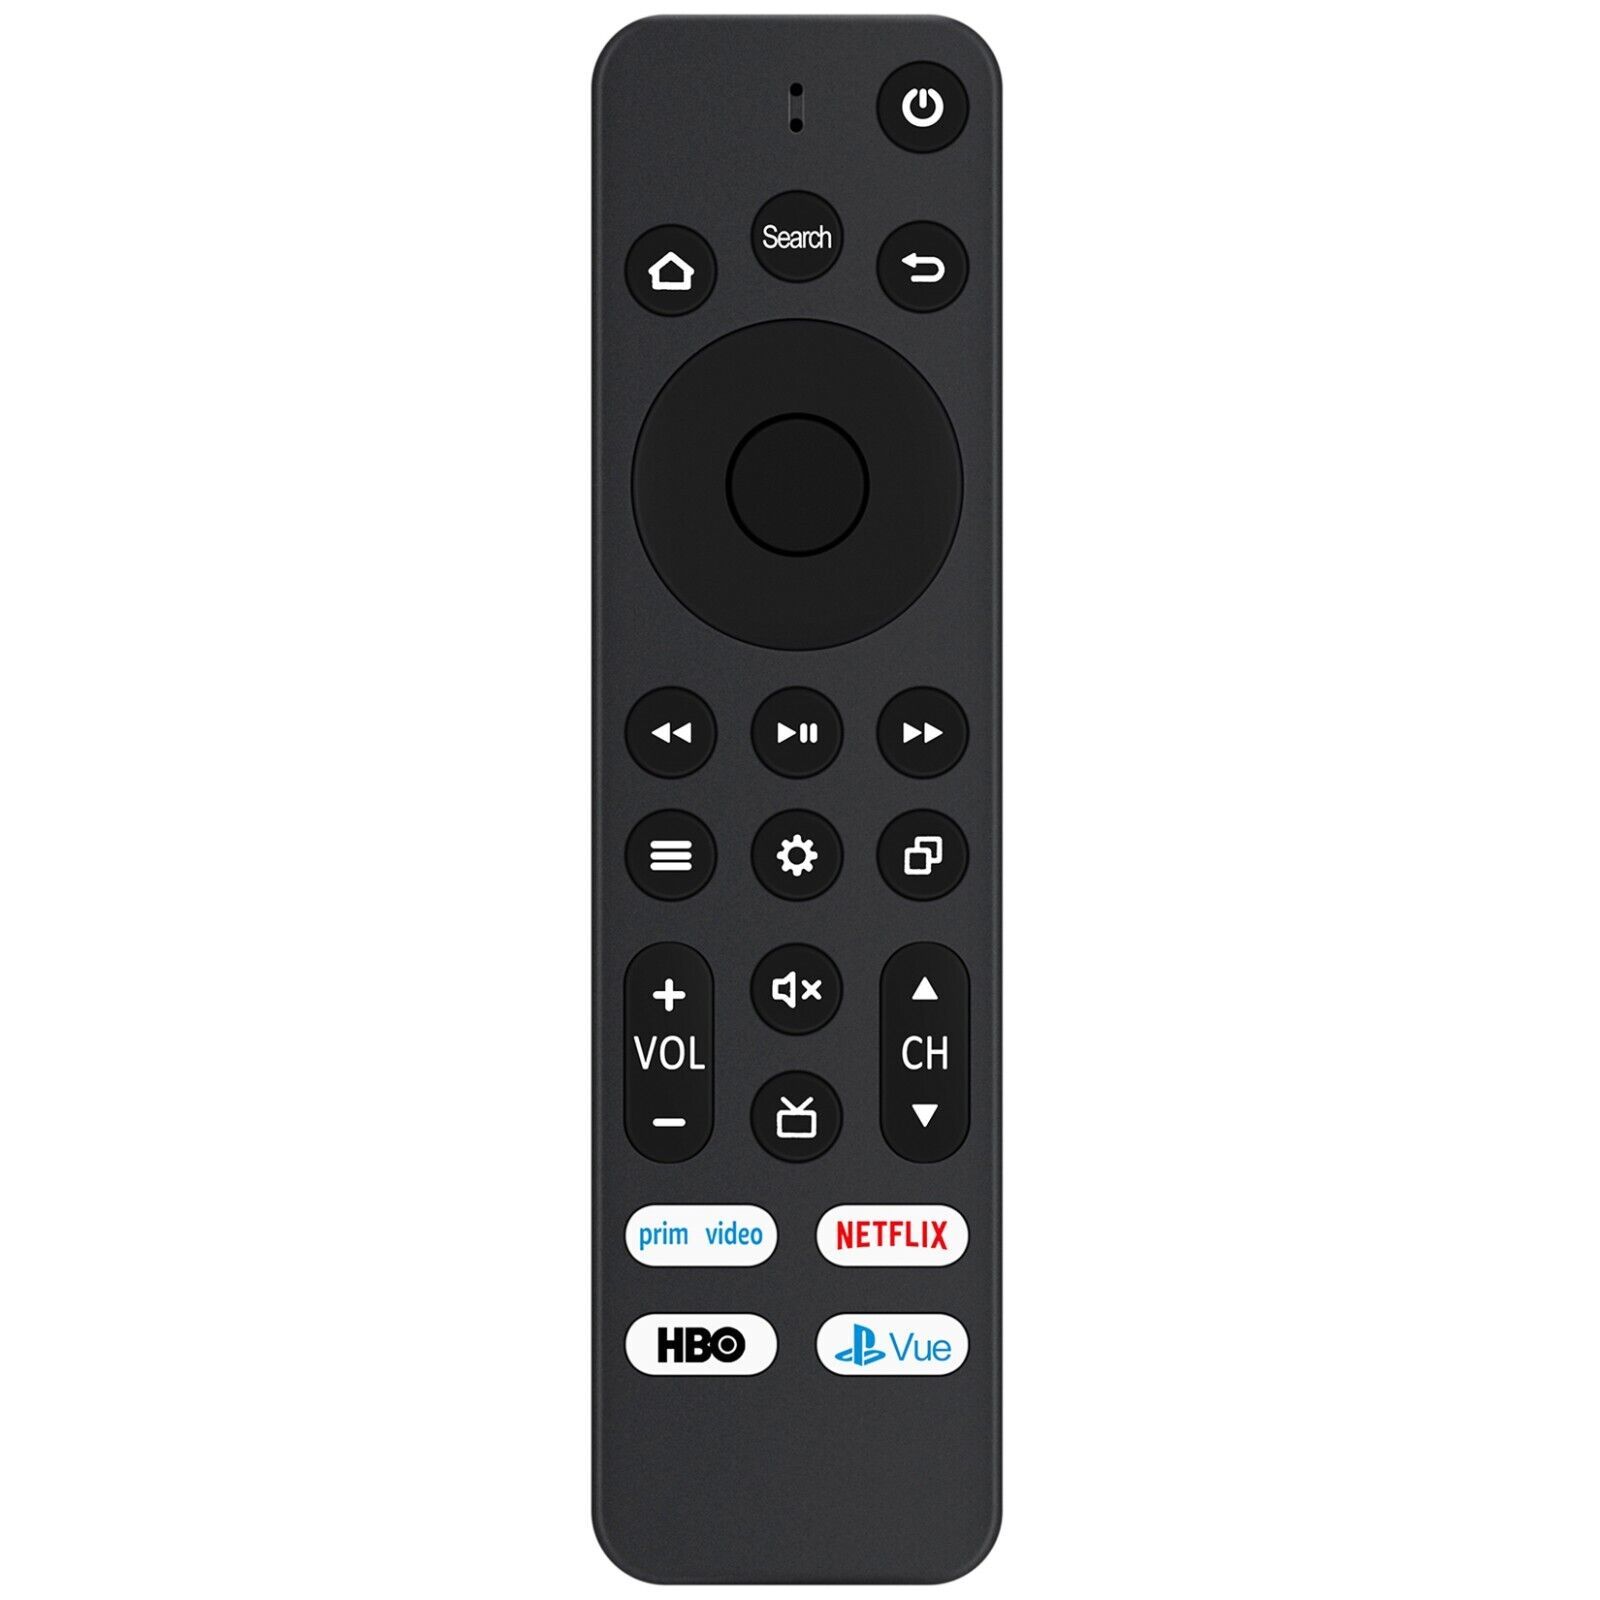 Ns-Rcfna-21 Infrared Replace Remote For Insignia Tv Ns-50Df711Se21 Ns-58F301Na22 - $19.99